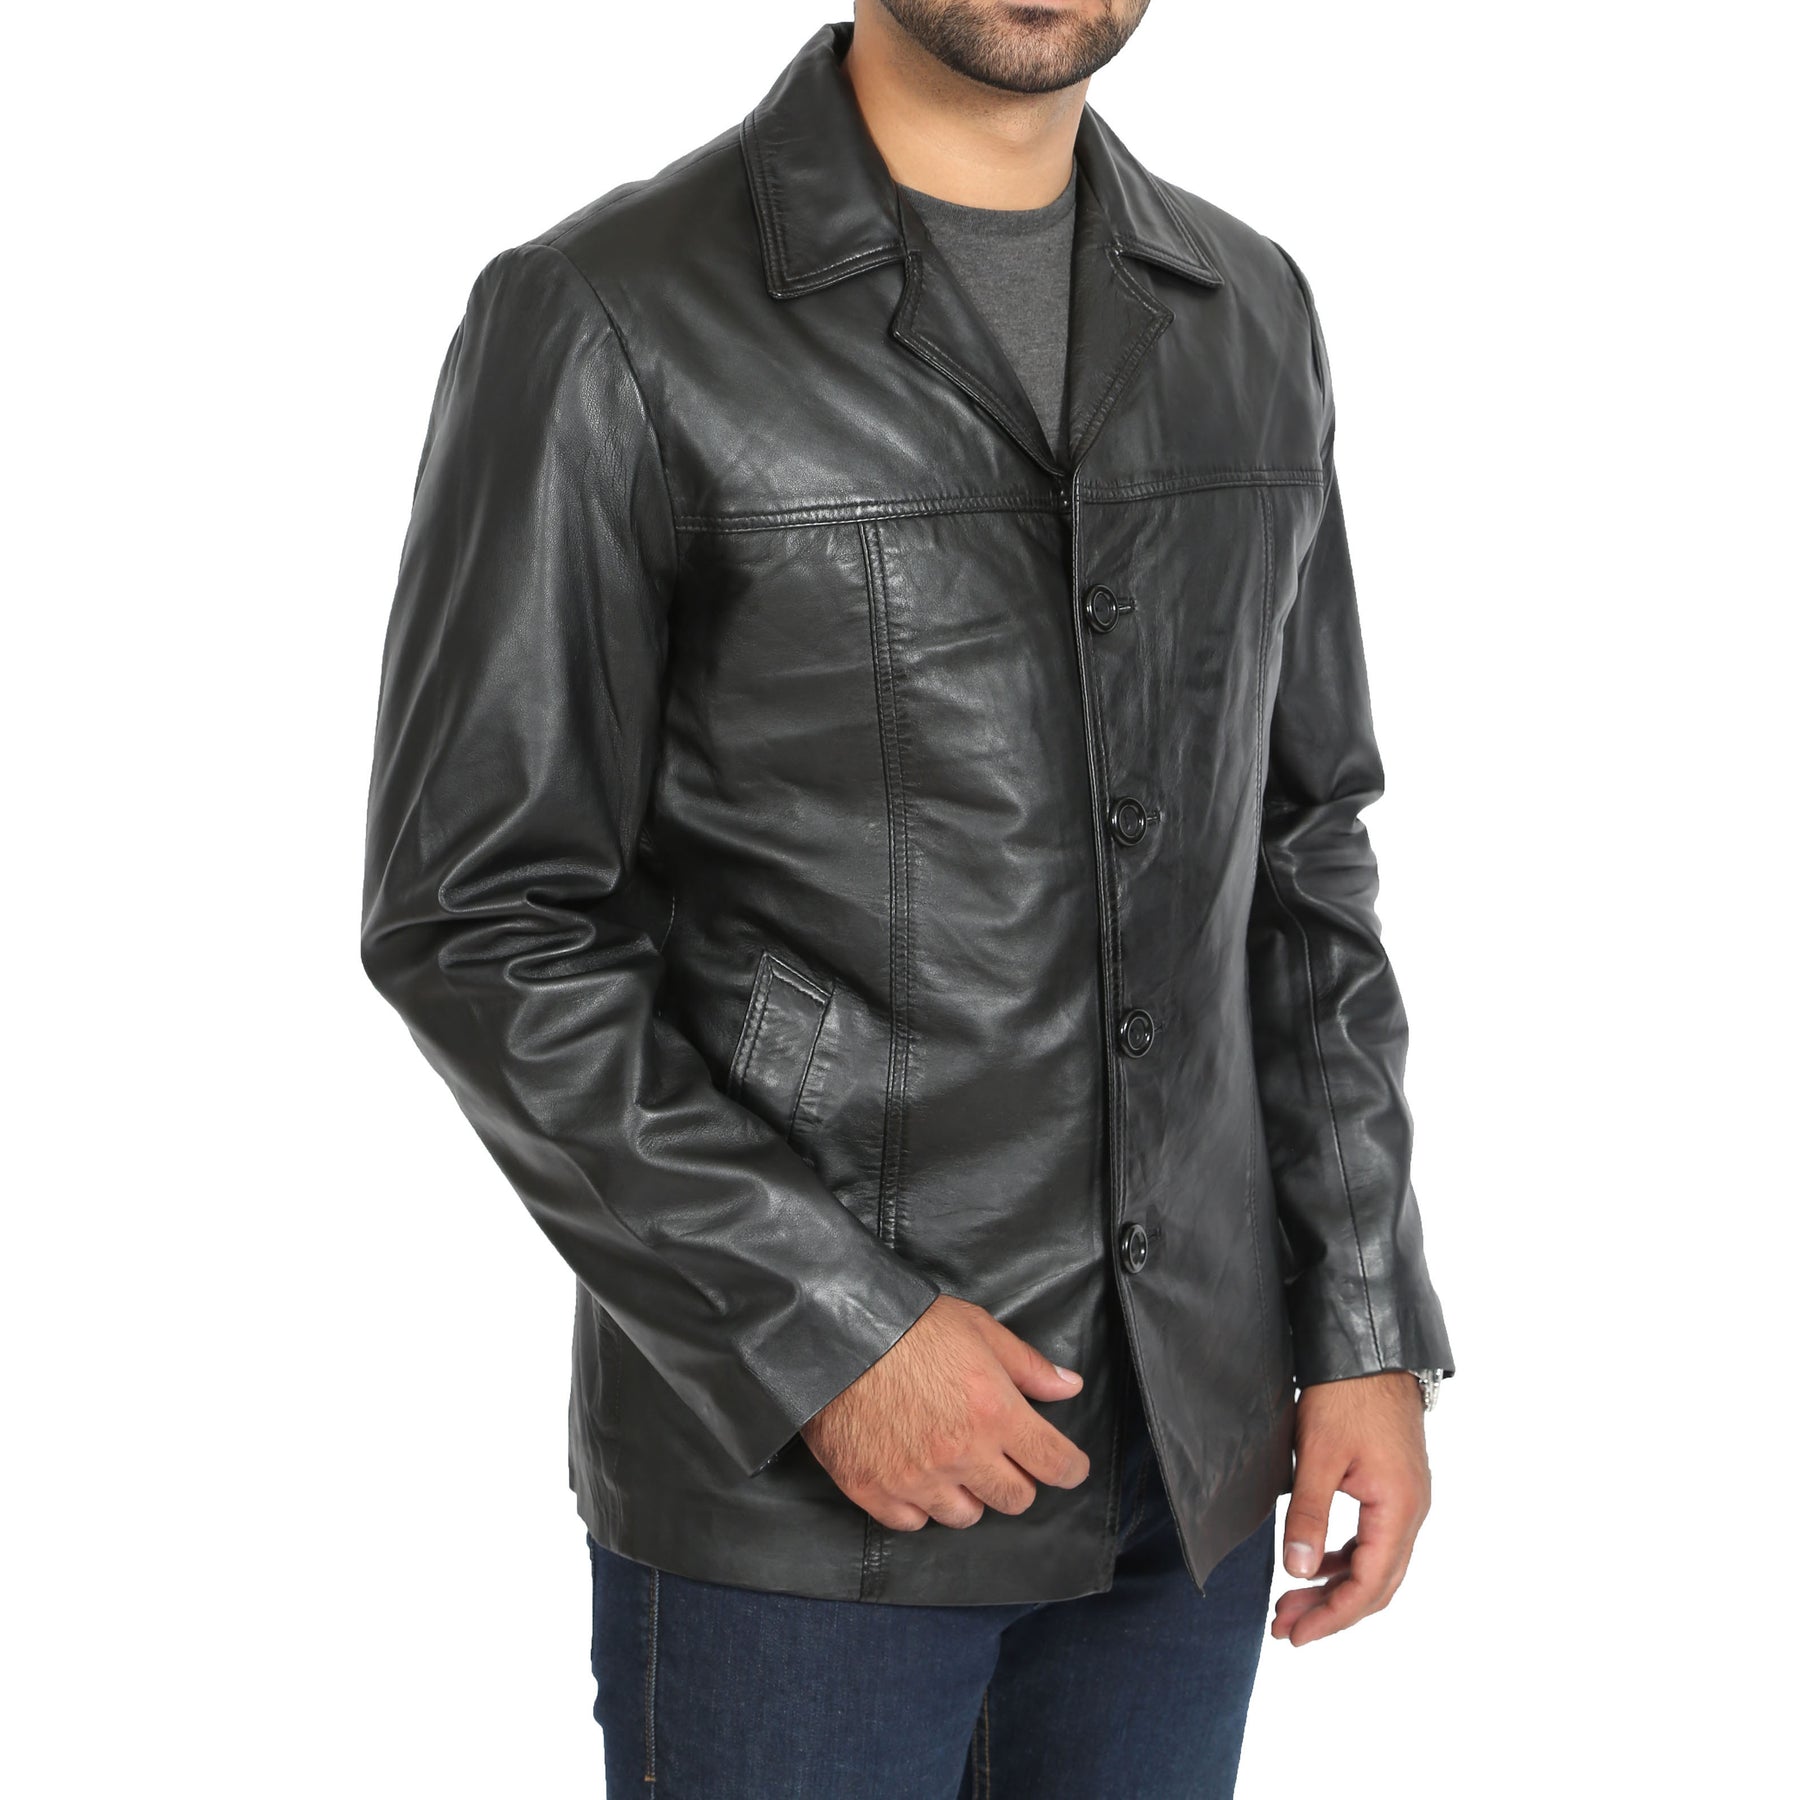 British Duffle Mens Reefer Jacket - Black Bdmblk002 - XL : Amazon.in:  Clothing & Accessories